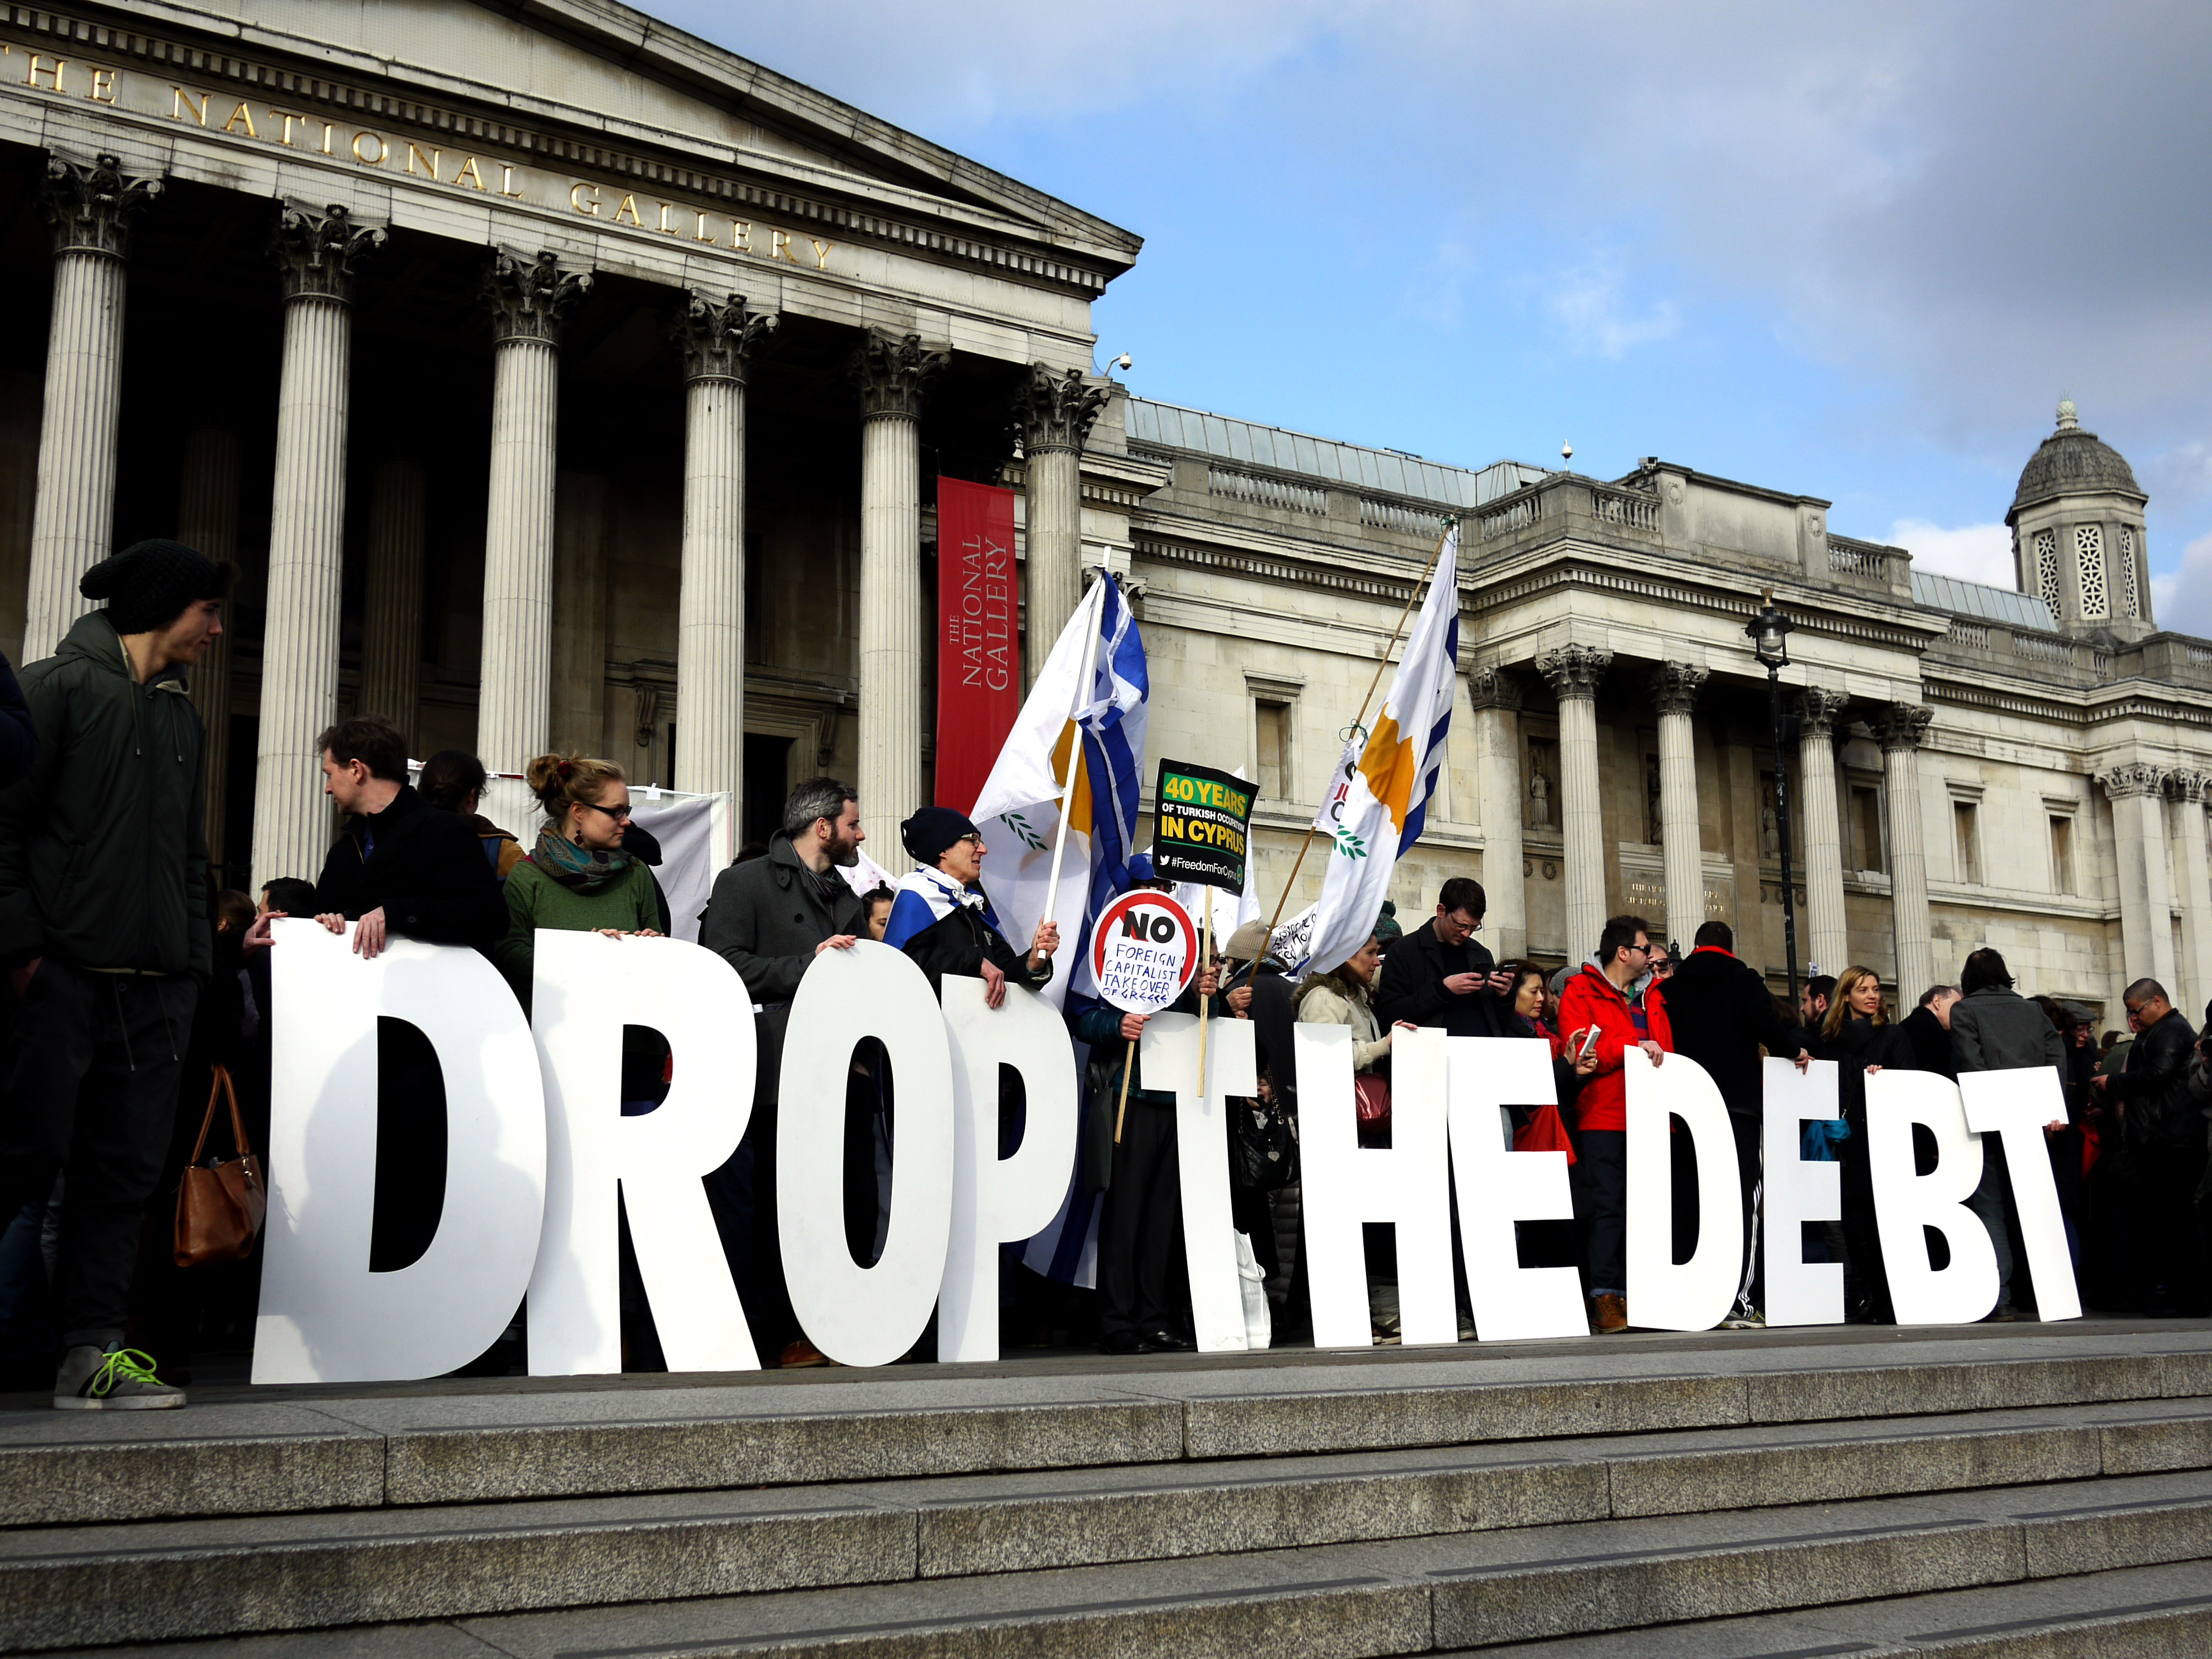 “Let Greece Breathe,” London, Feb 15, 2015. People gather around large cut-out letters that spell out “DROP THE DEPT” in Trafalgar Square, Greece